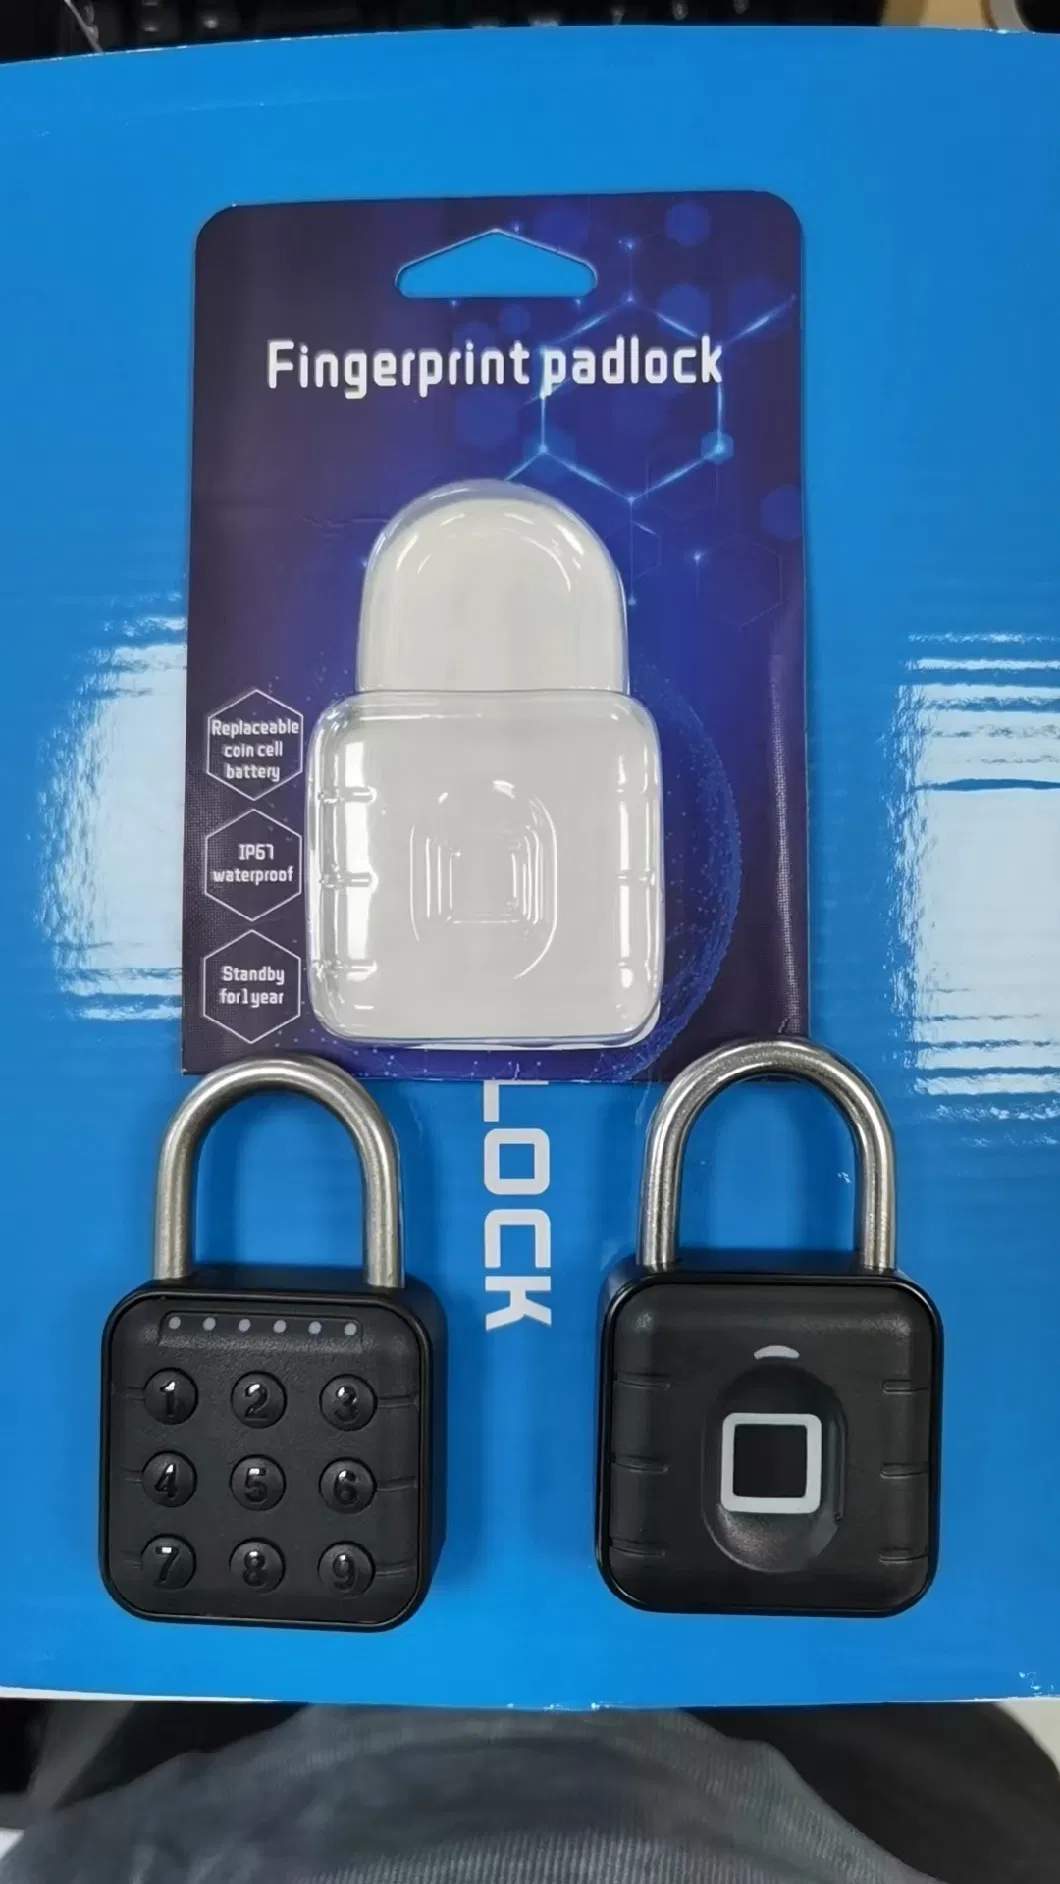 Password Padlock Smart Lock with USB Charging for Bags Luggage Suitcases Locker